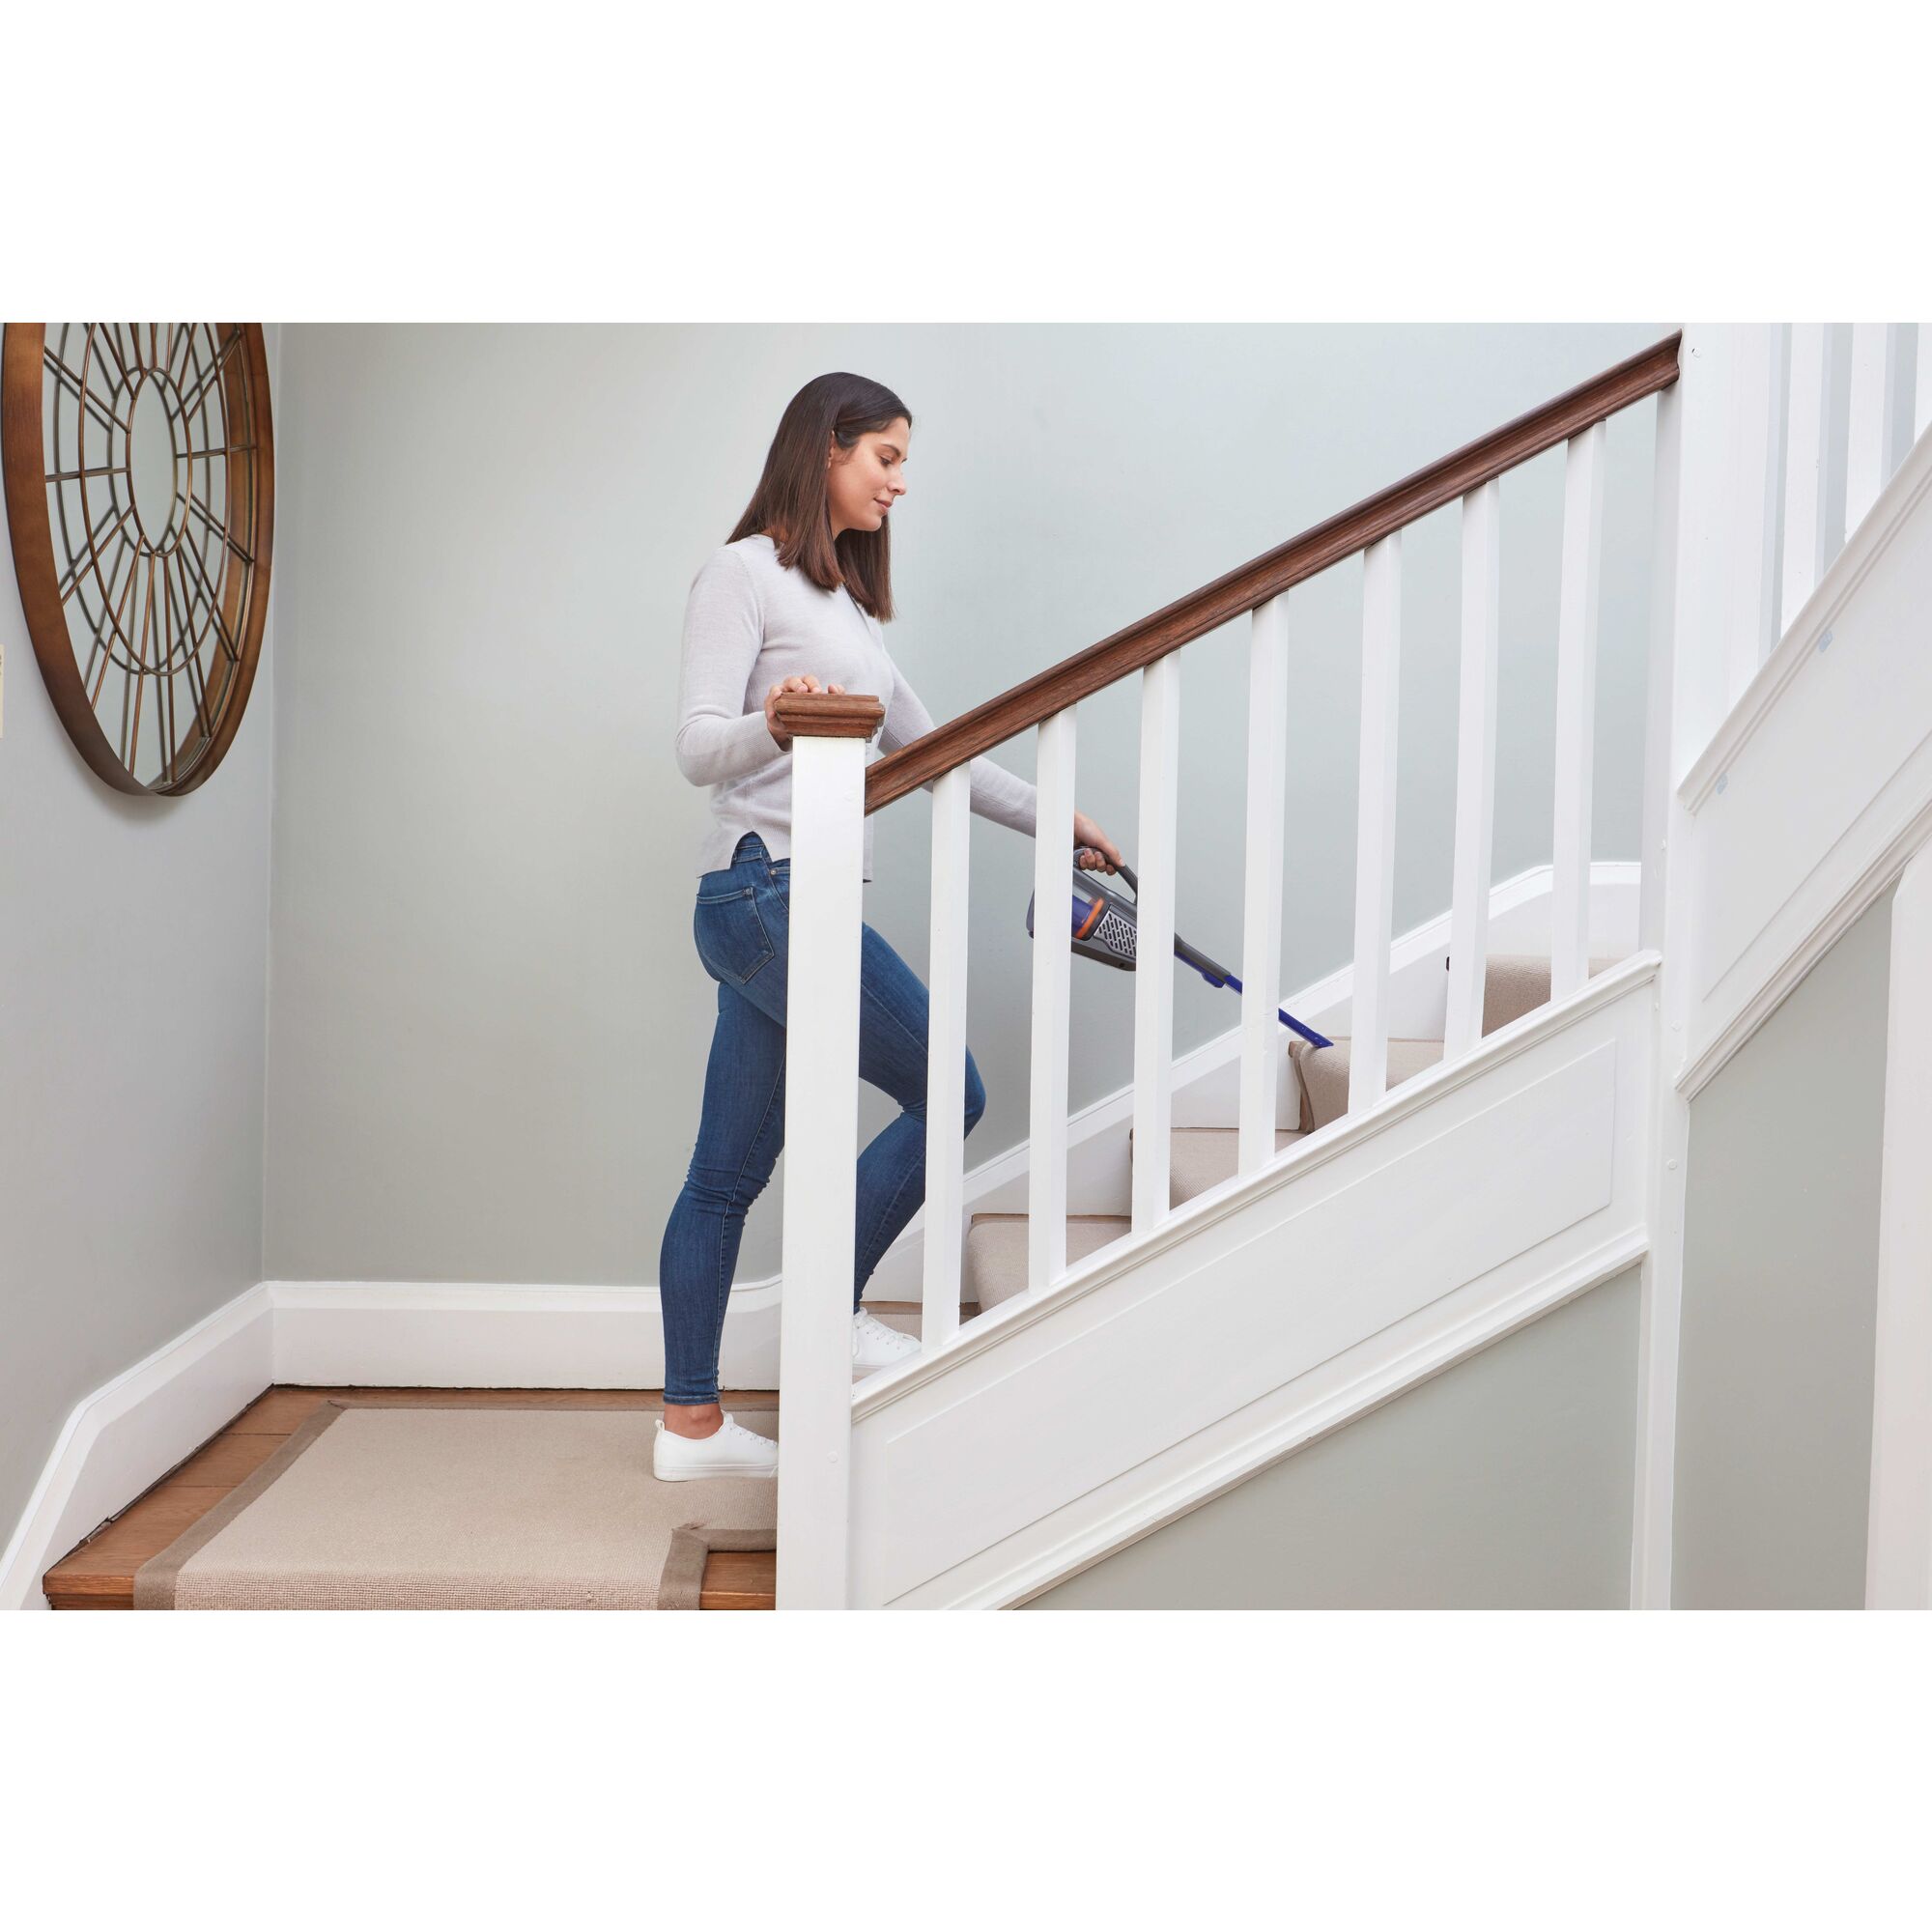 dustbuster AdvancedClean pet cordless hand vacuum being used by a person to clean stairs.